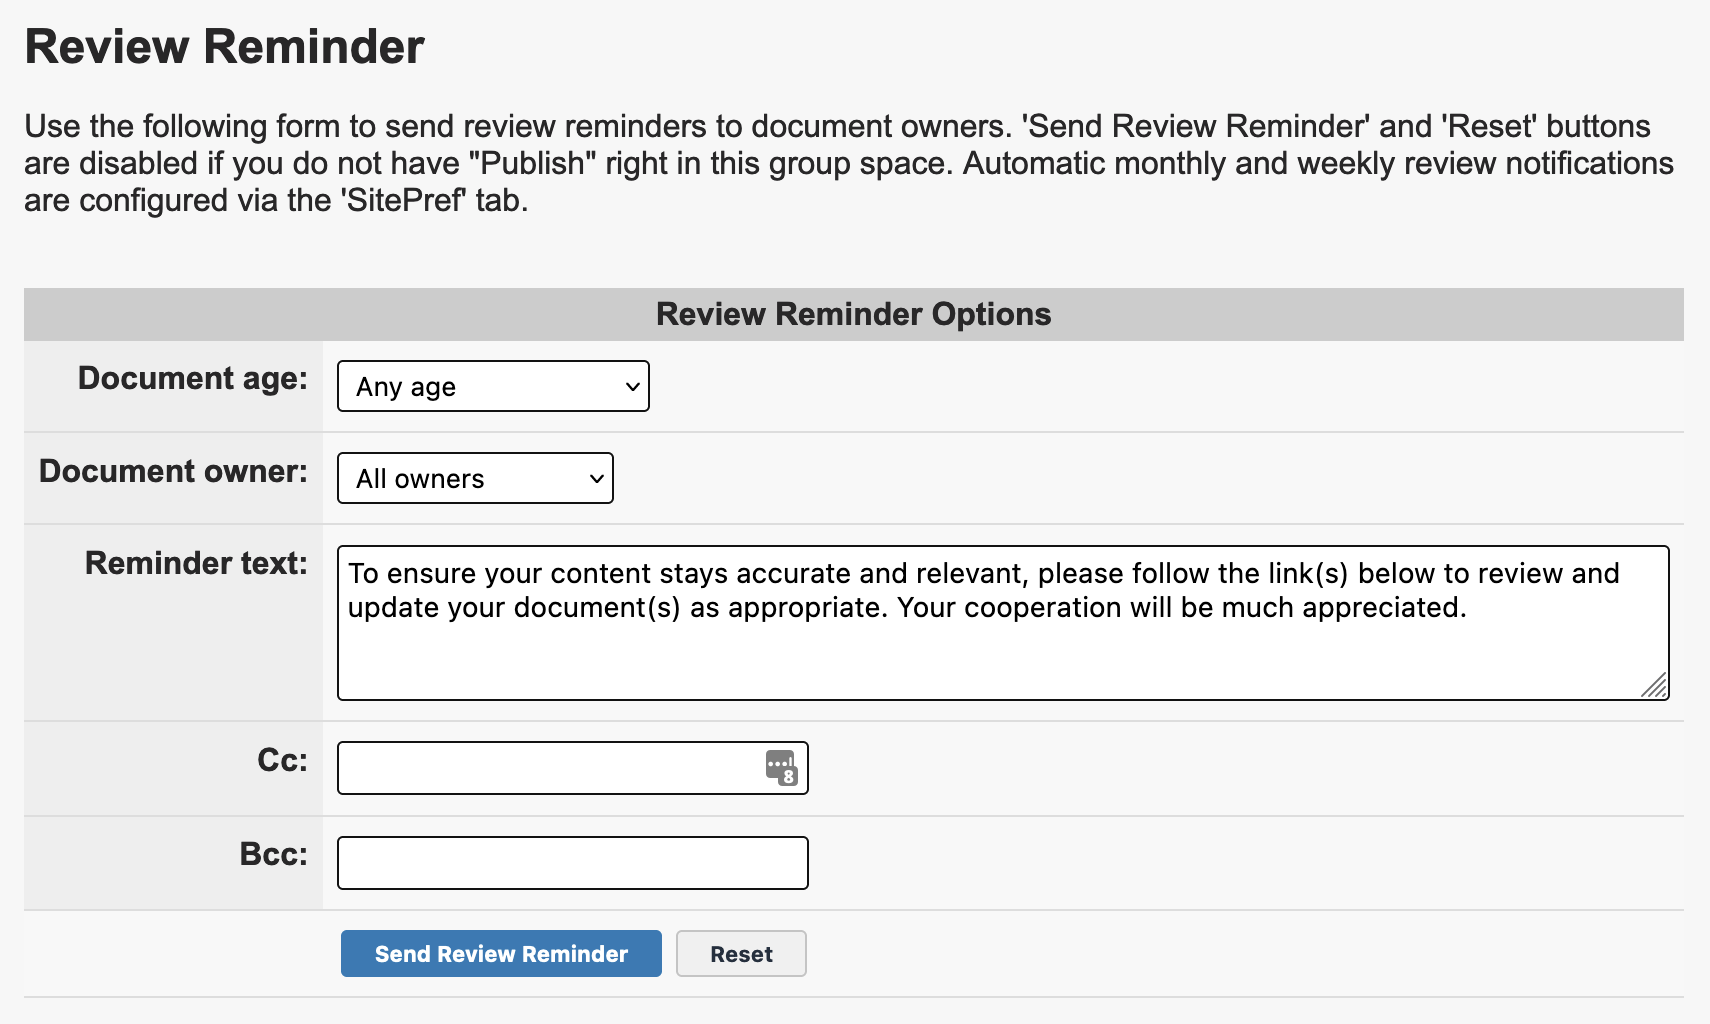 Screenshot of the Review Reminder form in the KB Admin Tools